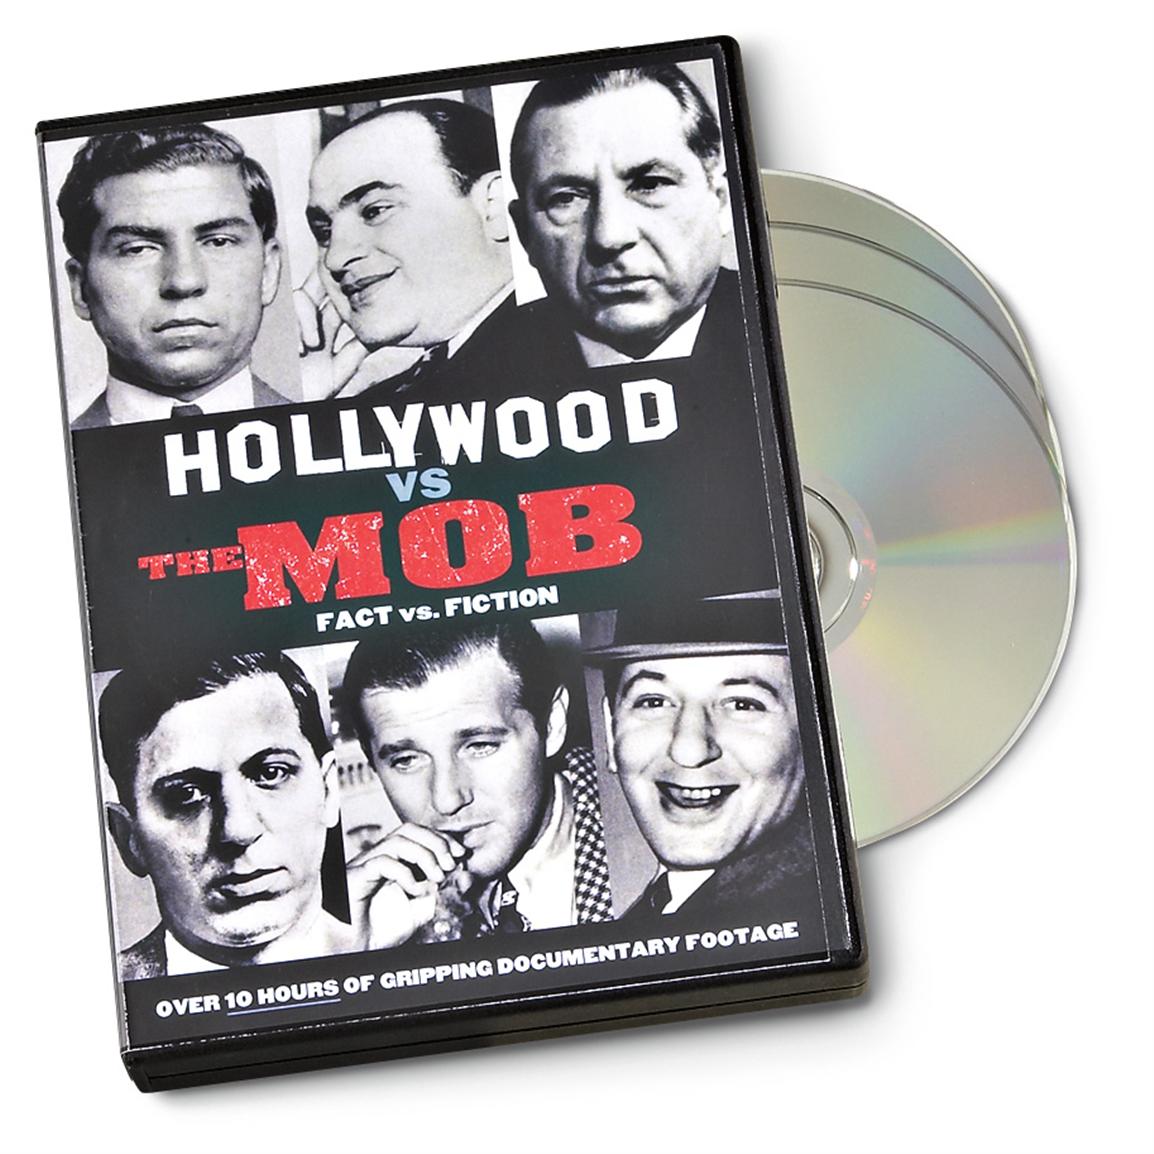 Hollywood vs. The Mob 3 - DVD Set - 149133, DVD's at Sportsman's Guide